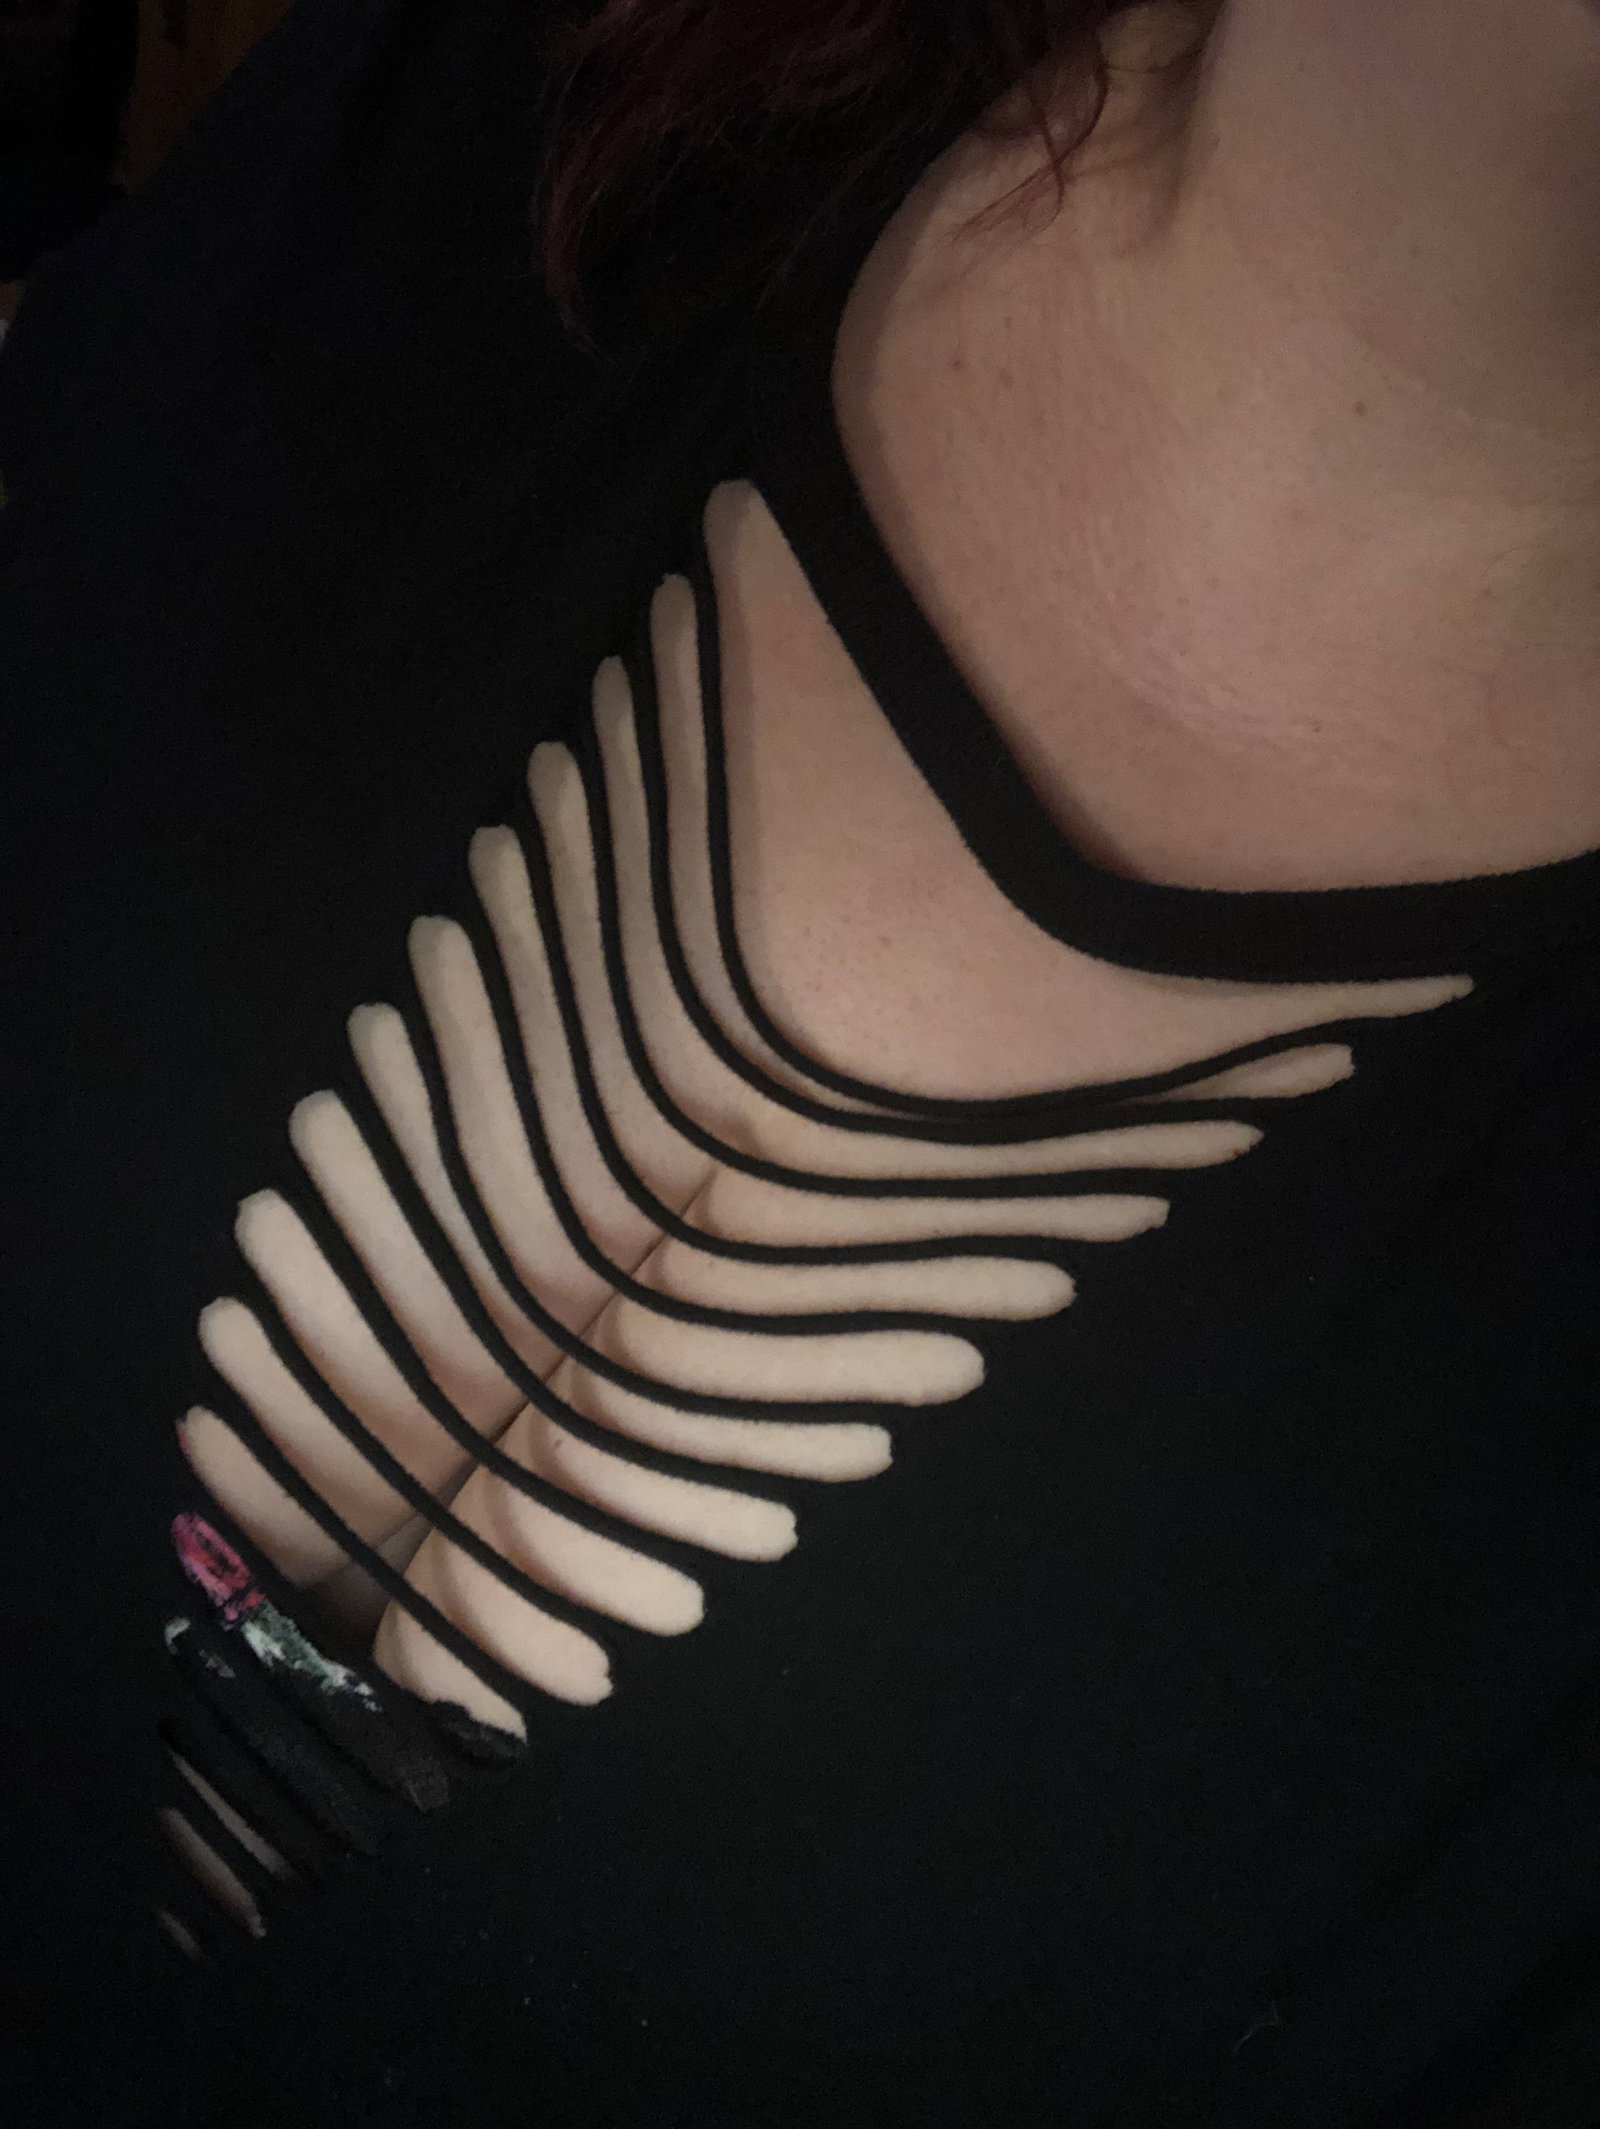 Watch the Photo by IrishMermaid with the username @IrishMermaid, posted on July 5, 2019. The post is about the topic Boobs, Only Boobs.